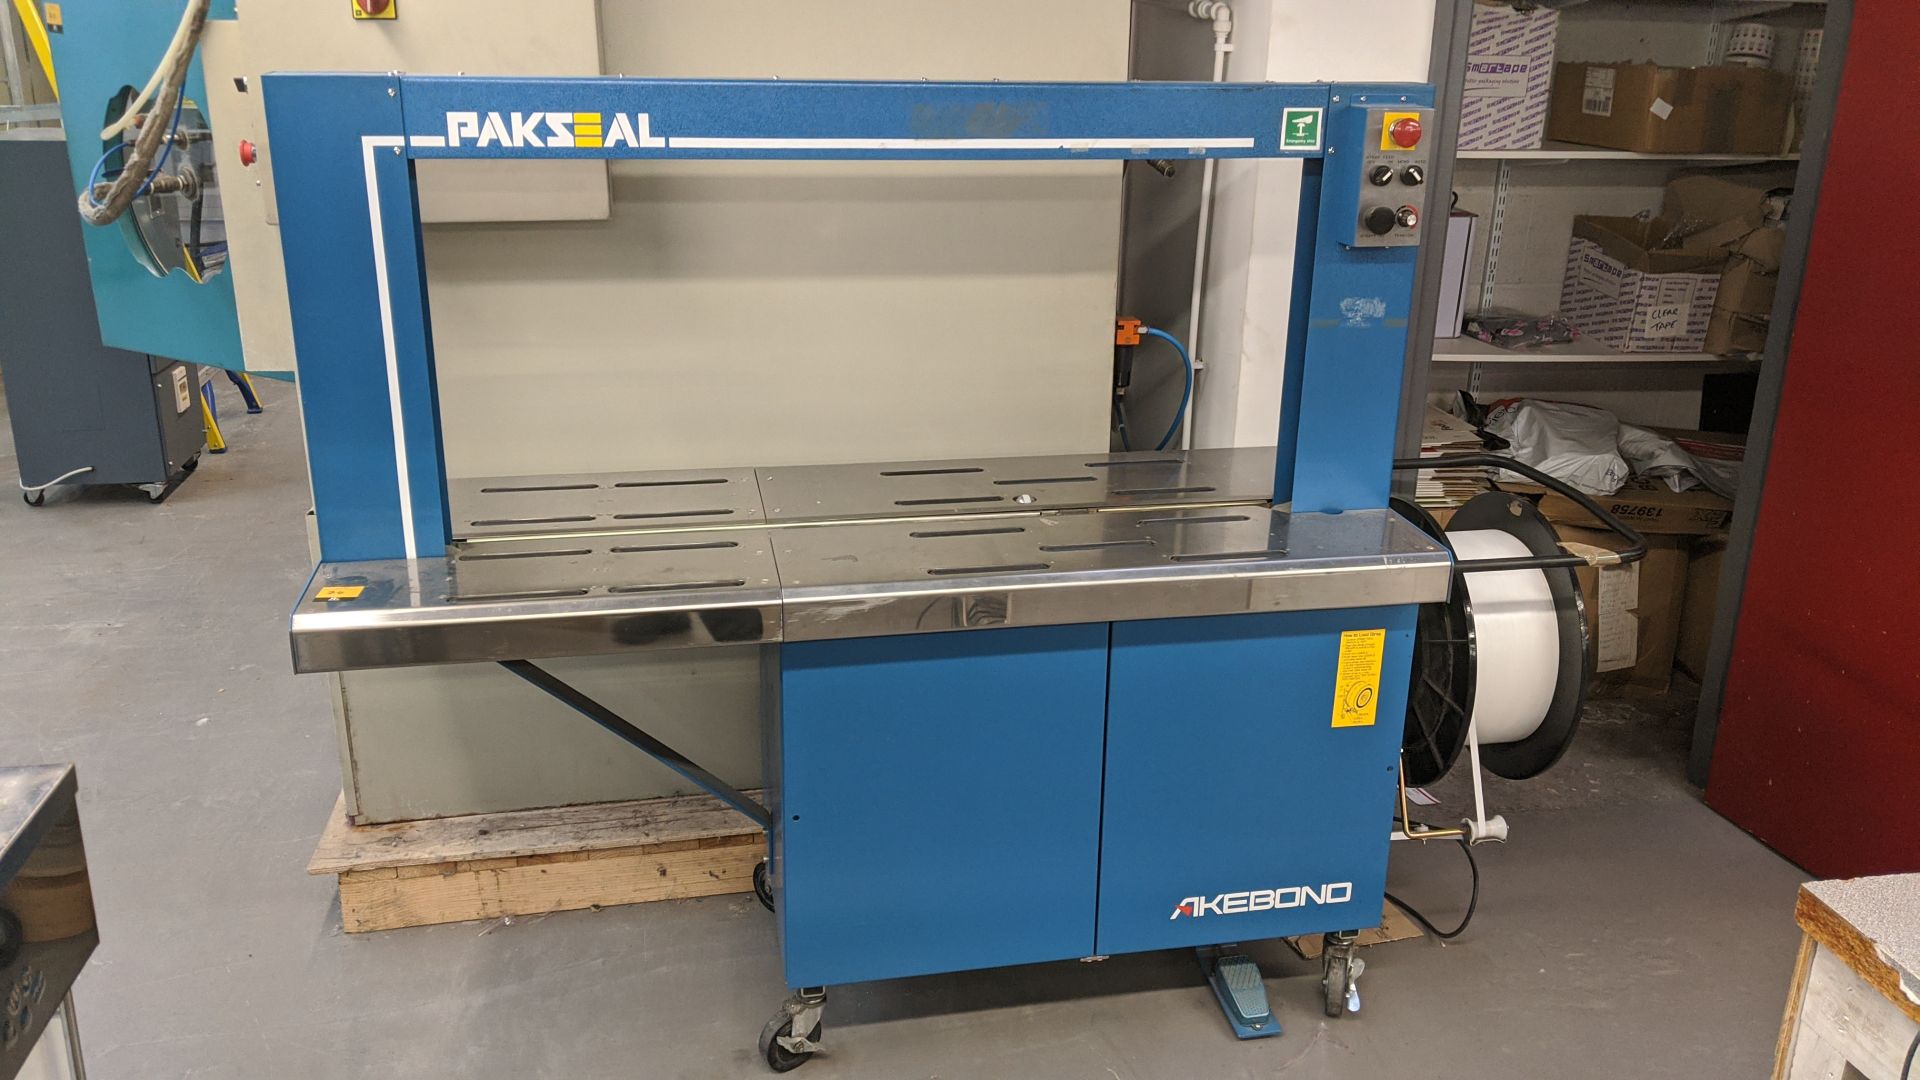 Pakseal Akebond large mobile automatic electric strapping/banding machine, model SX510, machine - Image 2 of 13